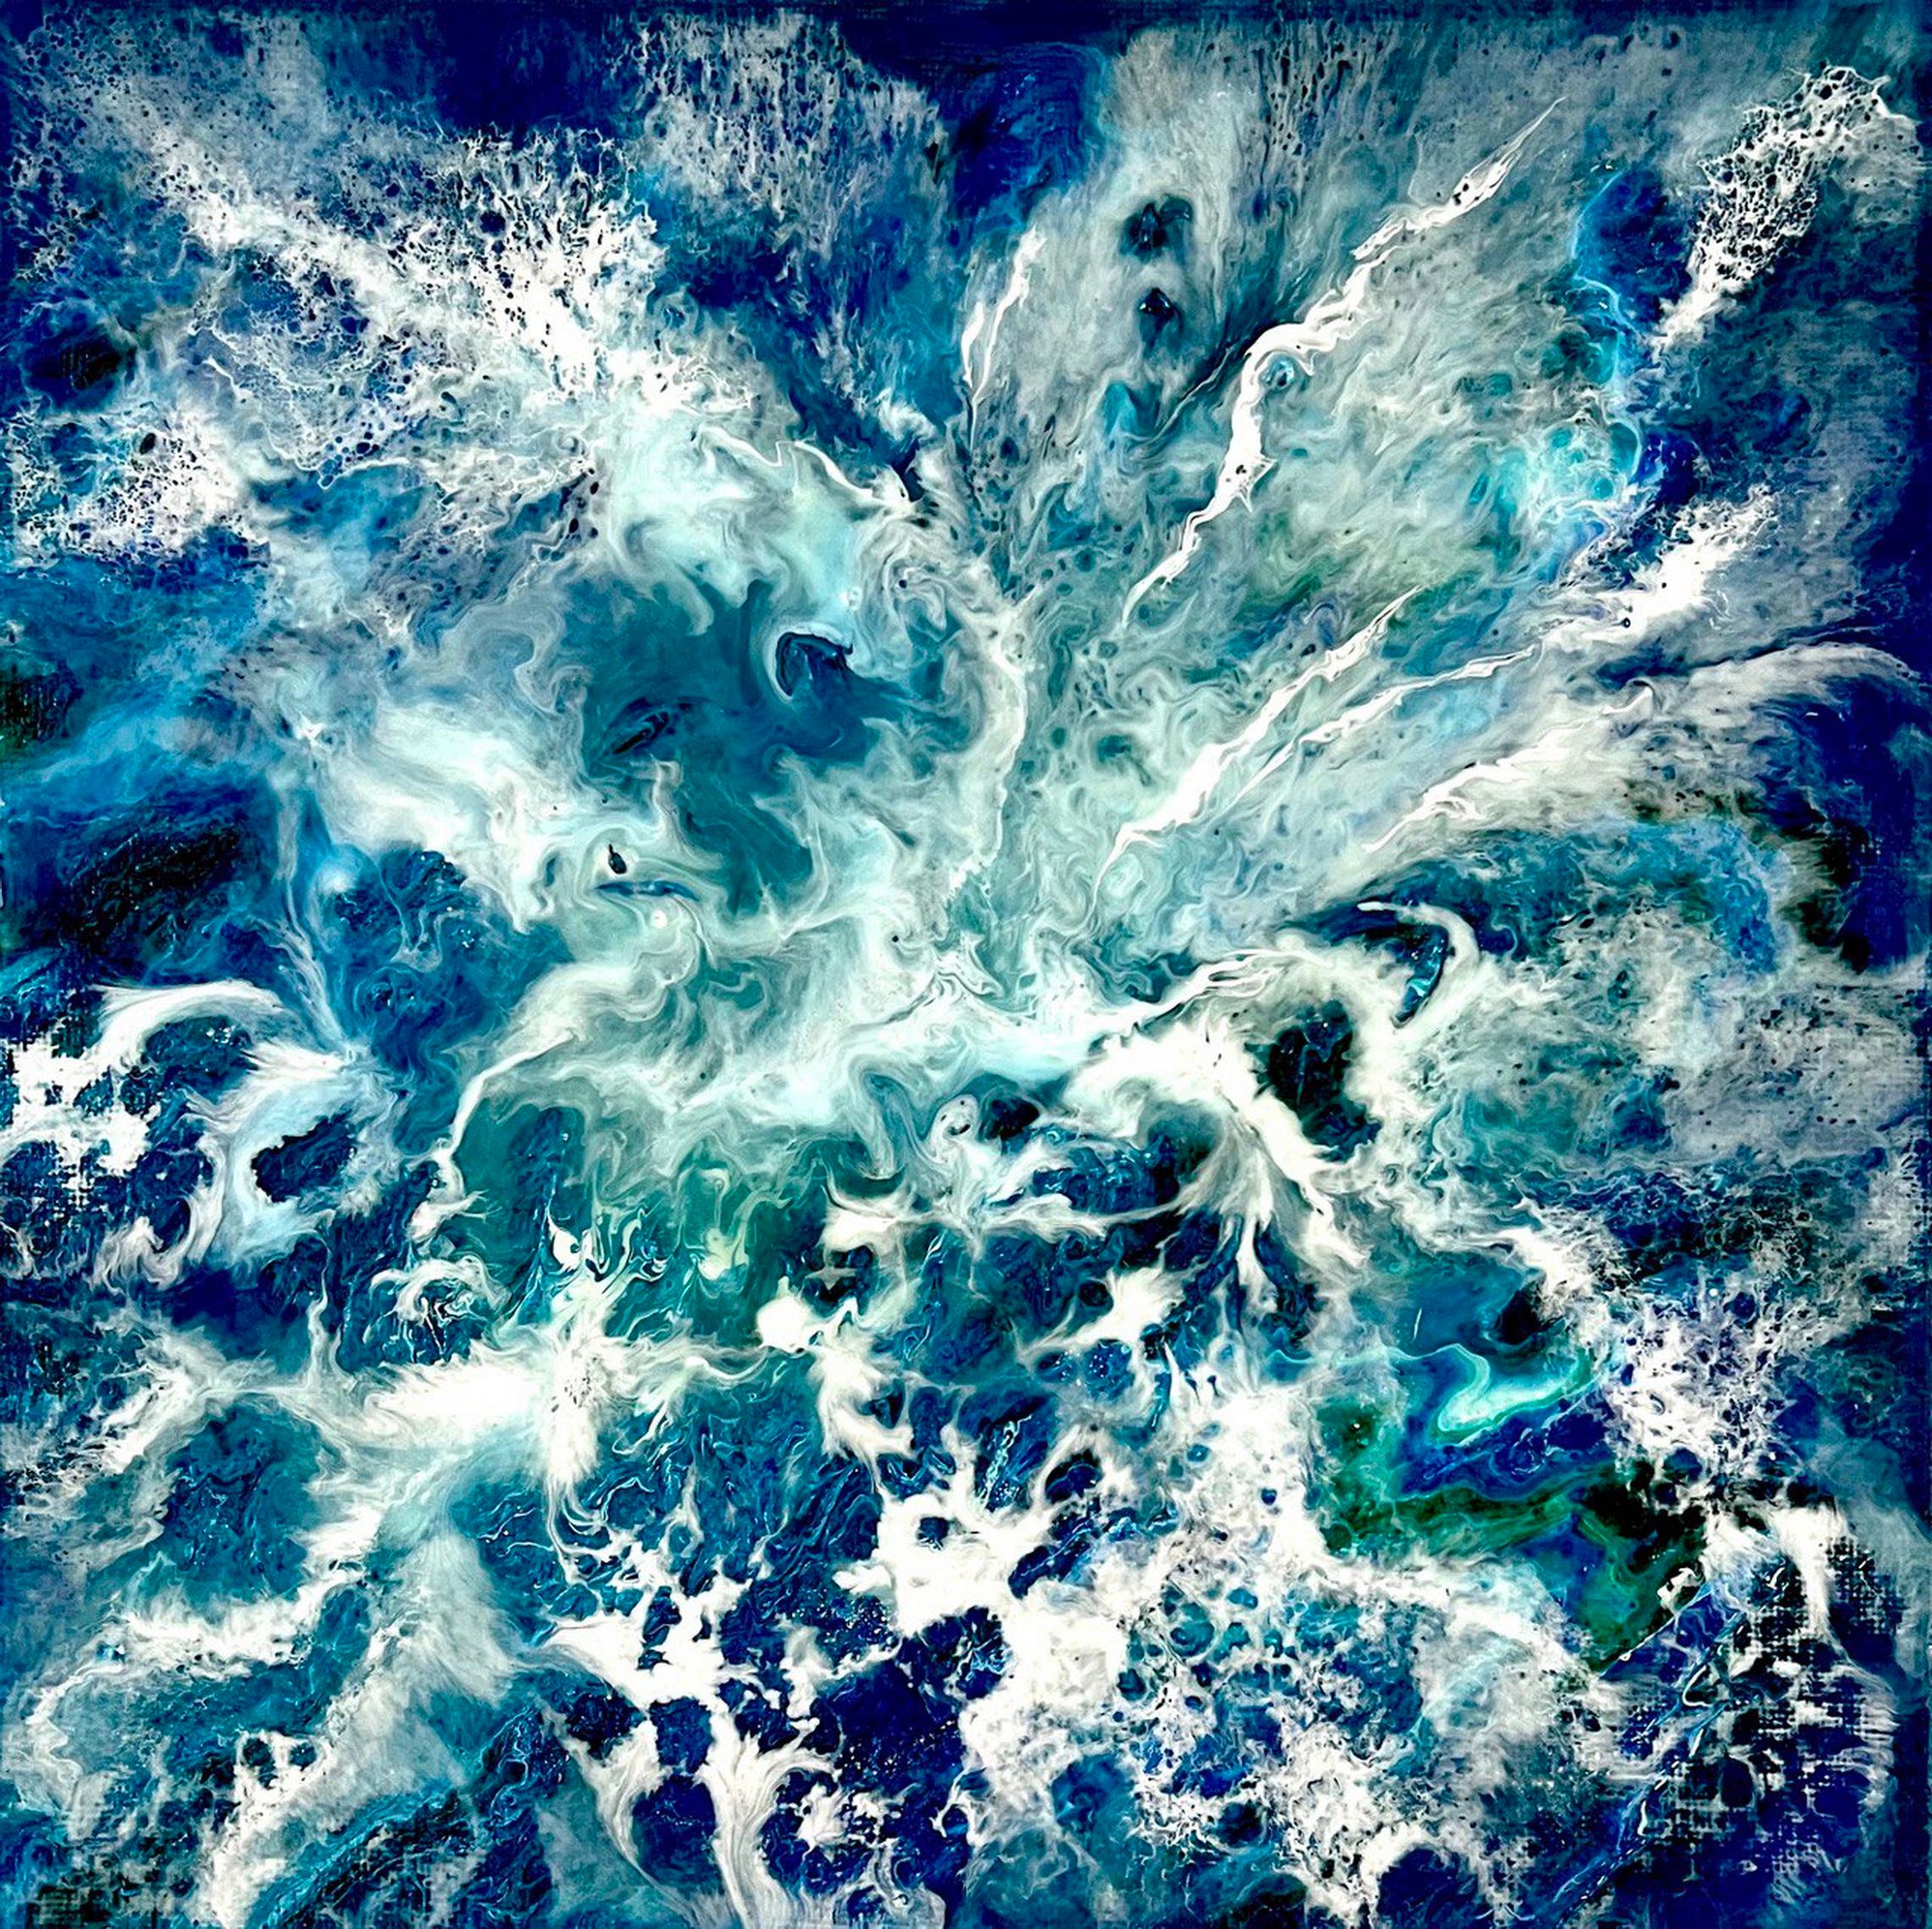   Oceania Celebration. Abstract expressionism. Sea / Water / Waves /40*40 cm.